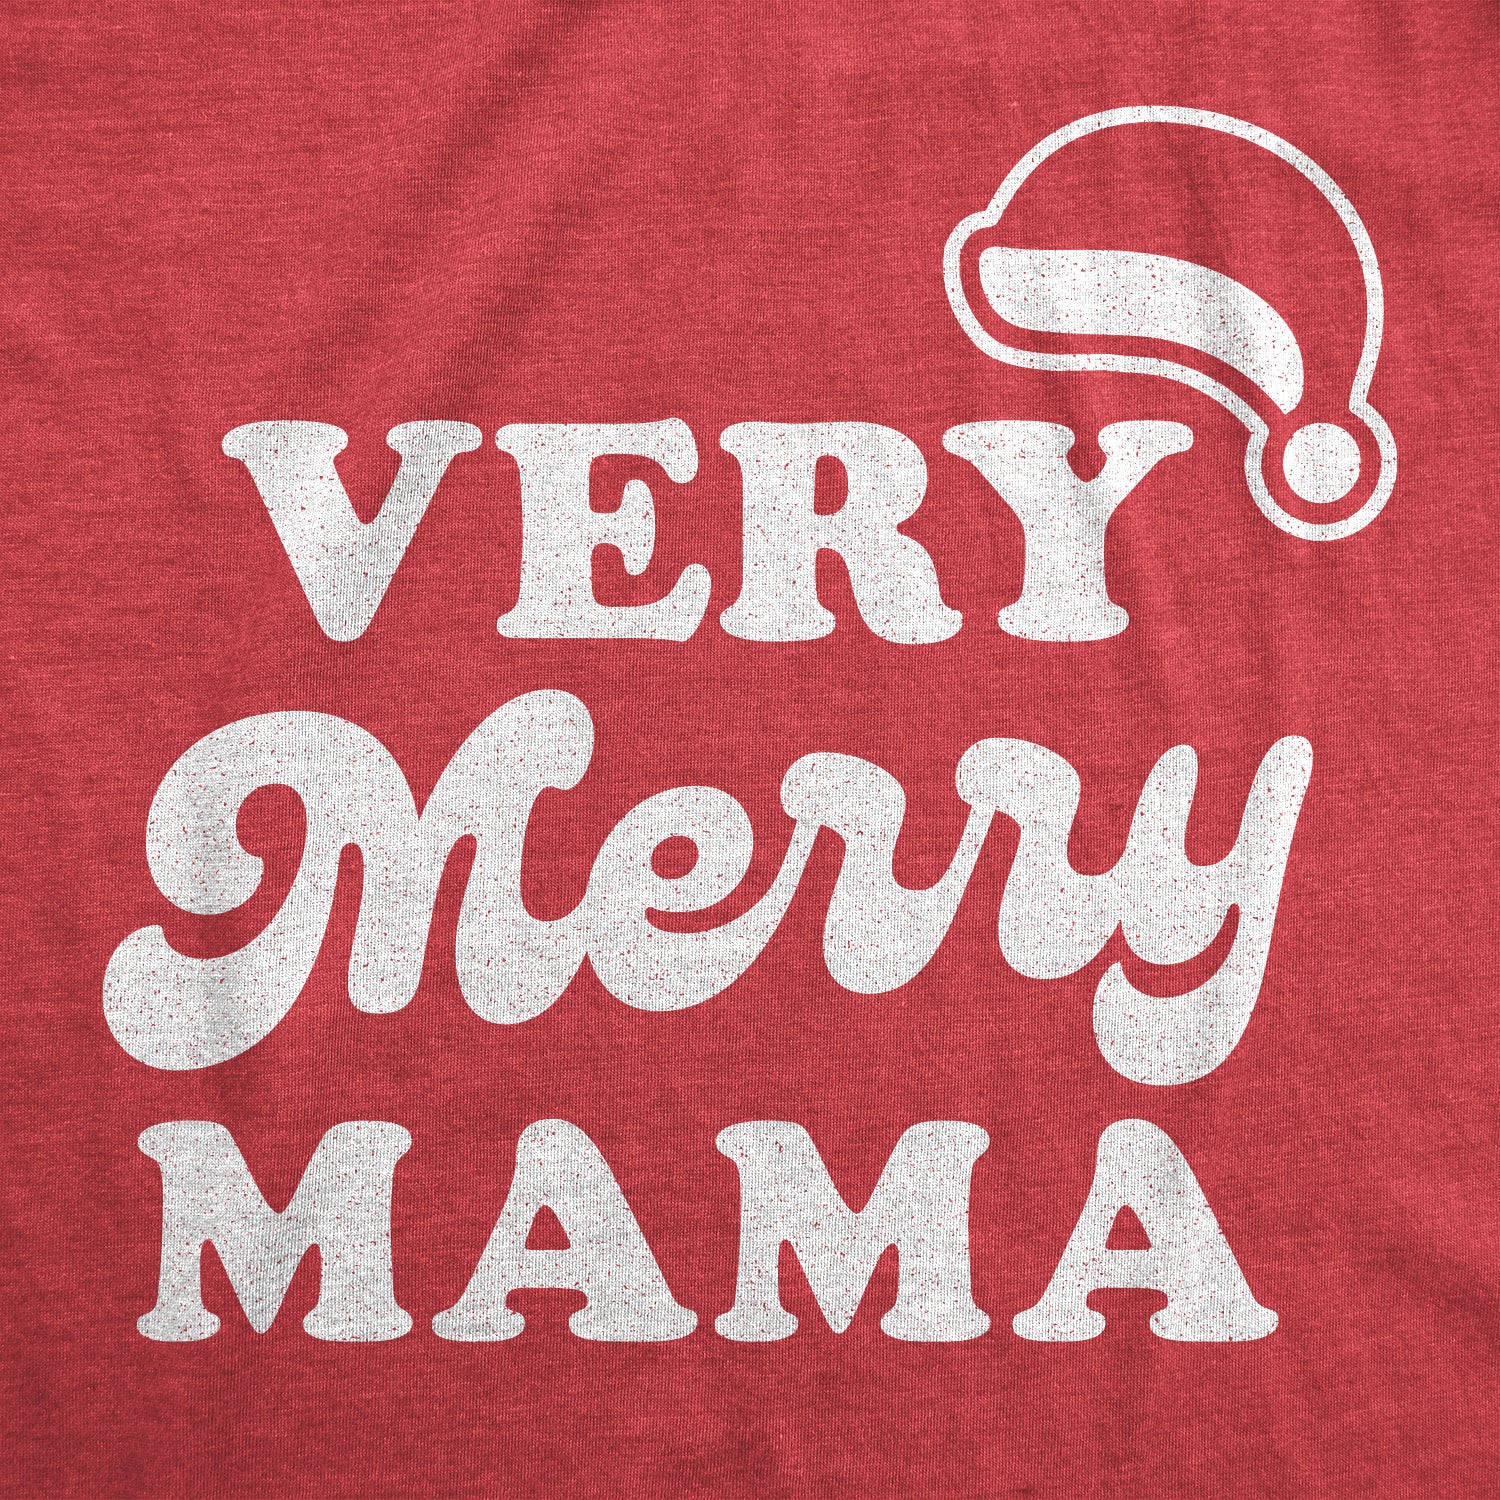 Funny Heather Red Very Merry Mama Maternity T Shirt Nerdy Christmas Tee